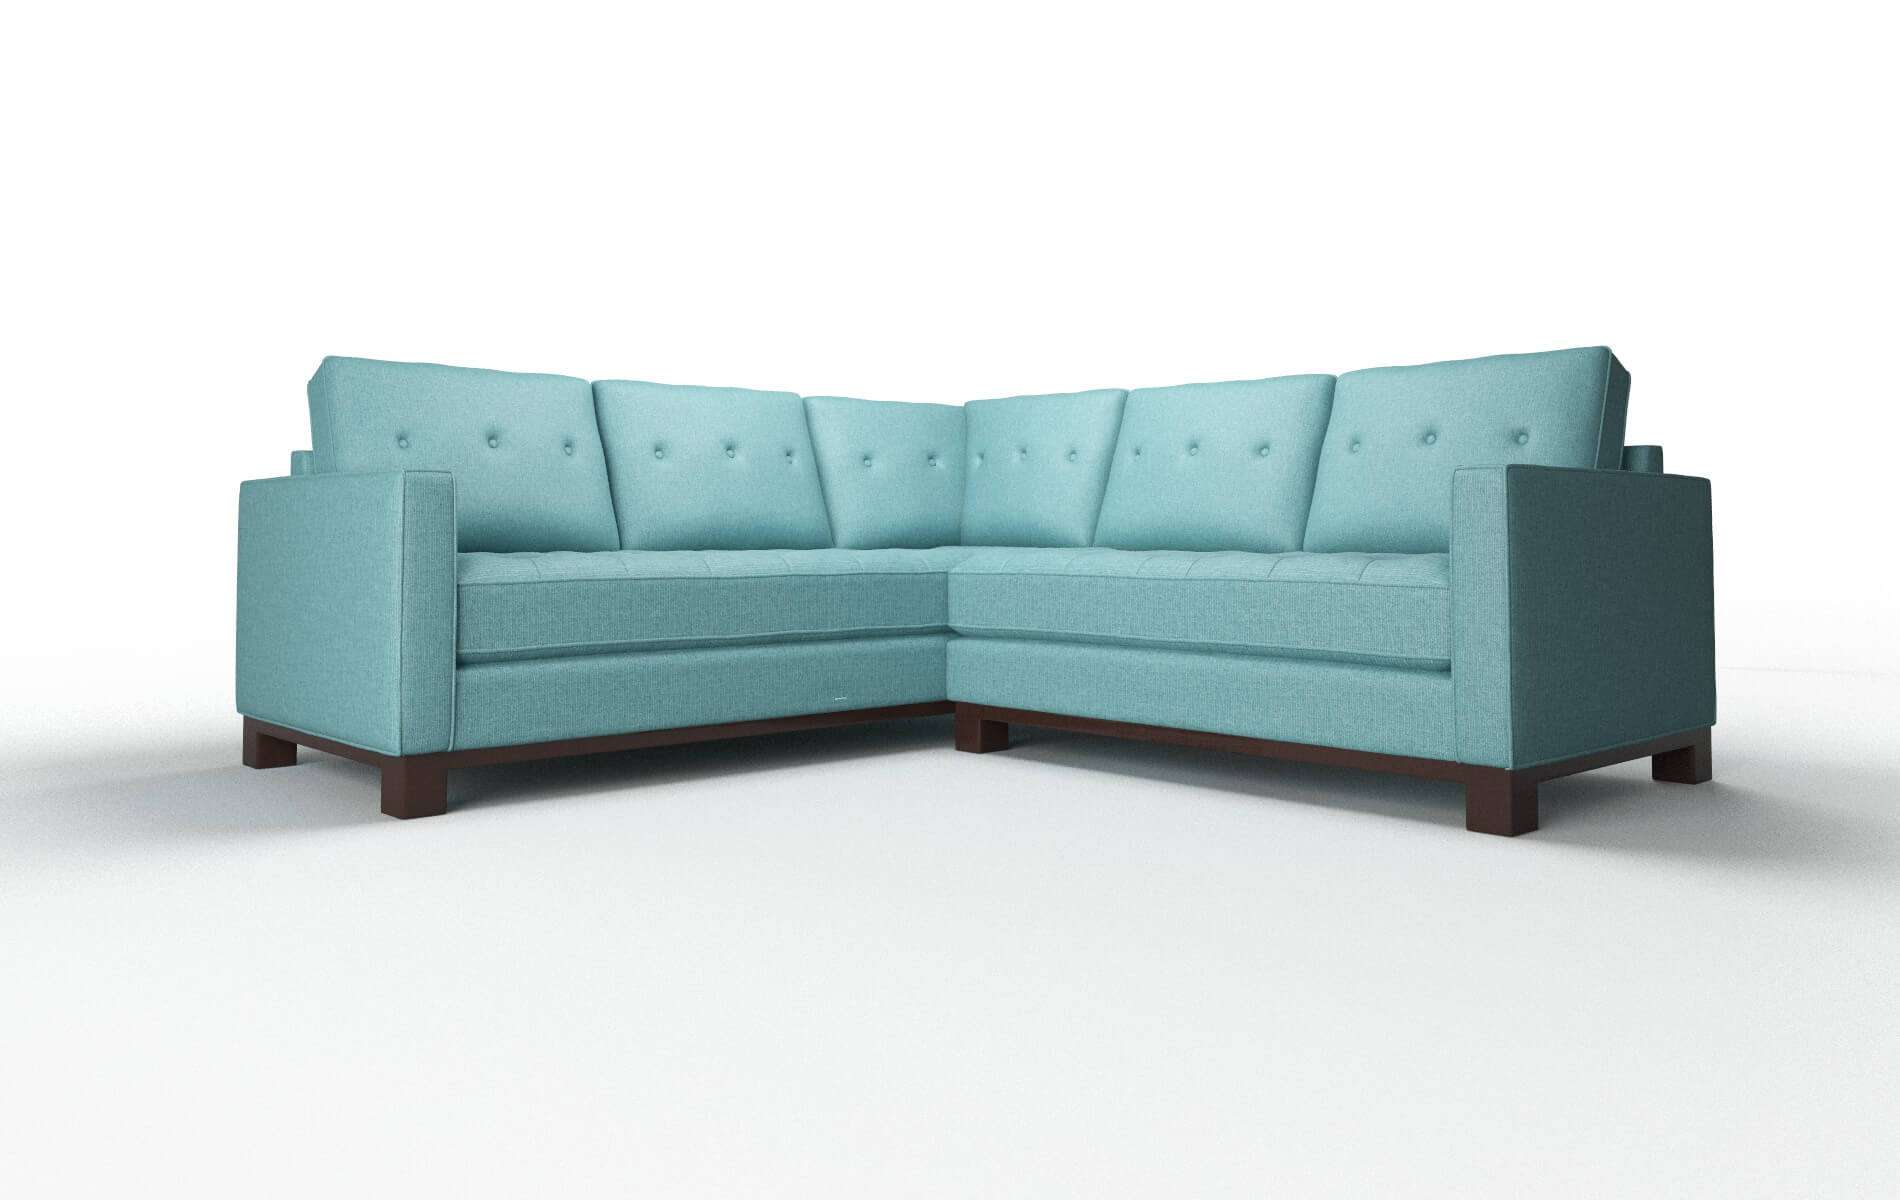 Syros Parker Turquoise Sectional espresso legs 1